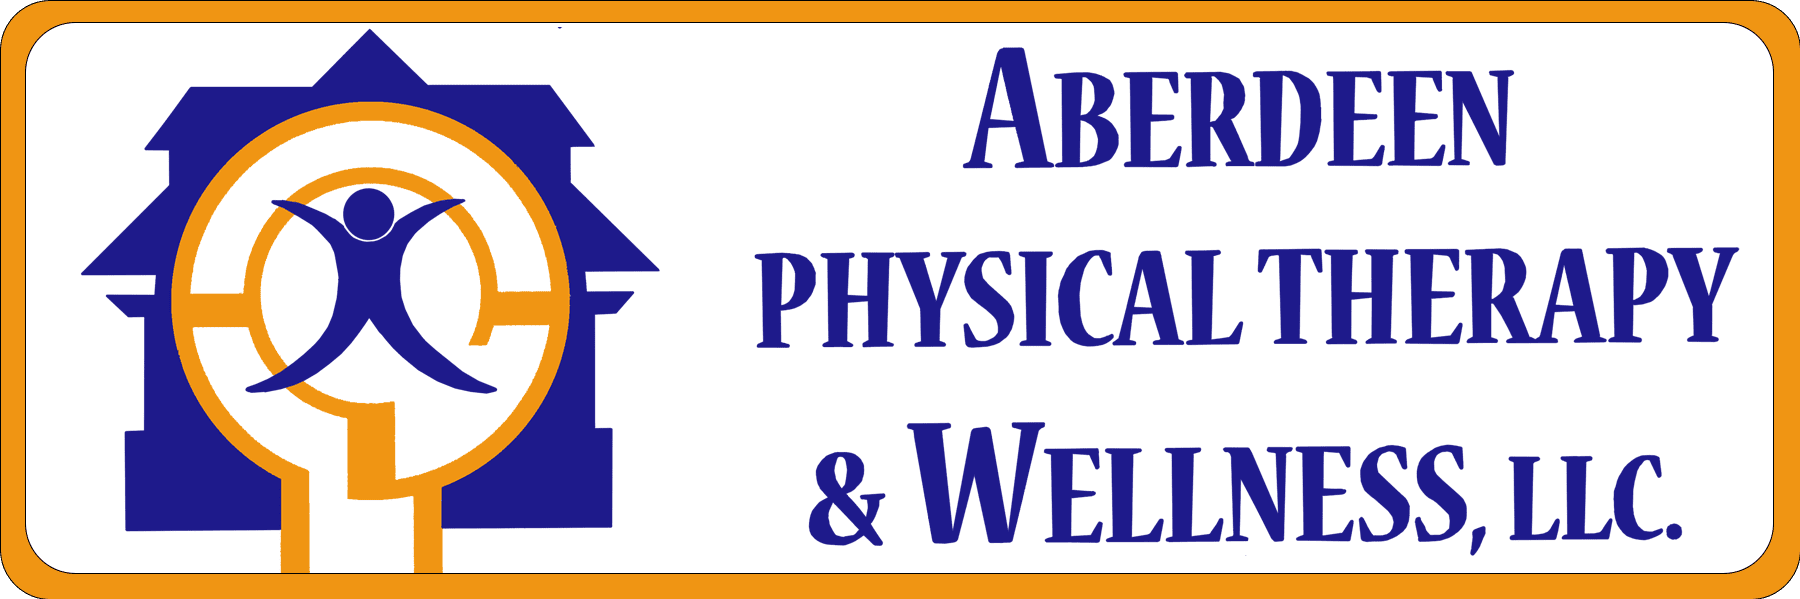 Aberdeen Physical Therapy & Wellness Logo